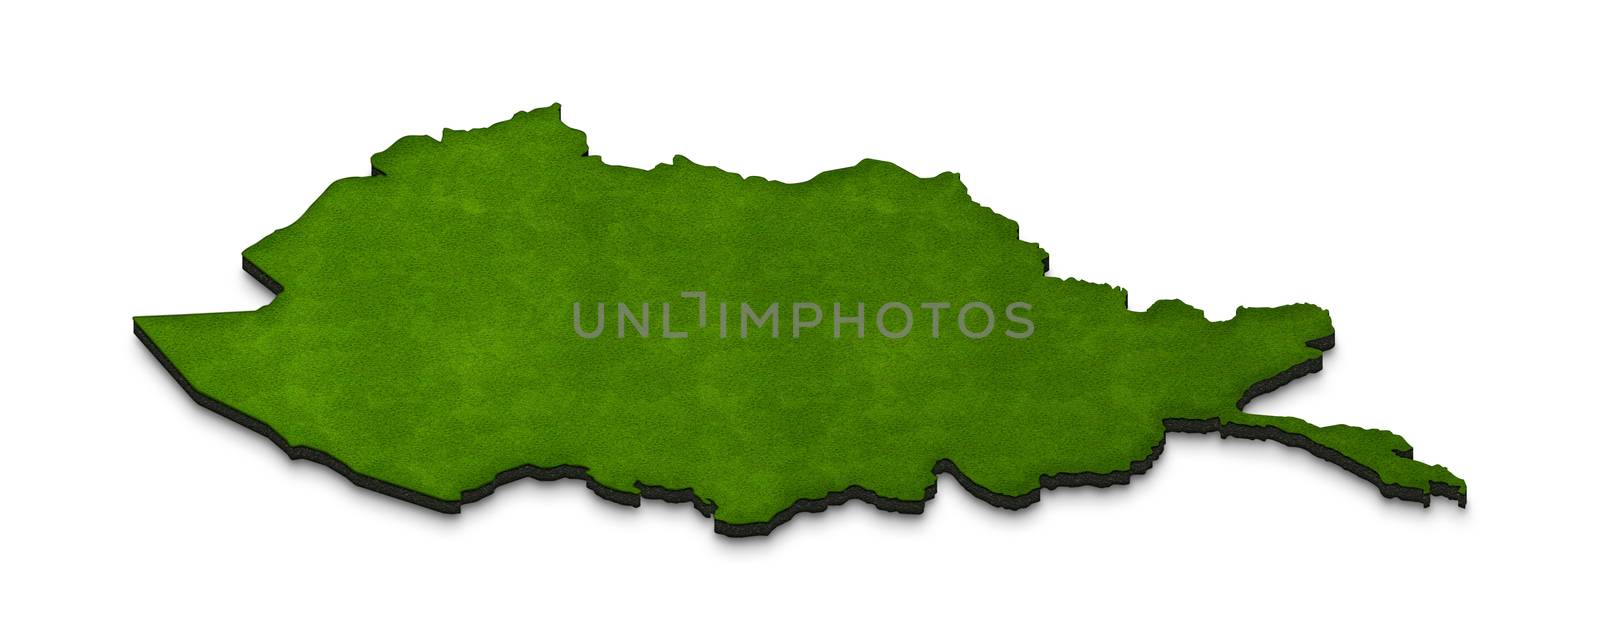 Illustration of a green ground map of Afghanistan on isolated background. Left 3D isometric perspective projection.